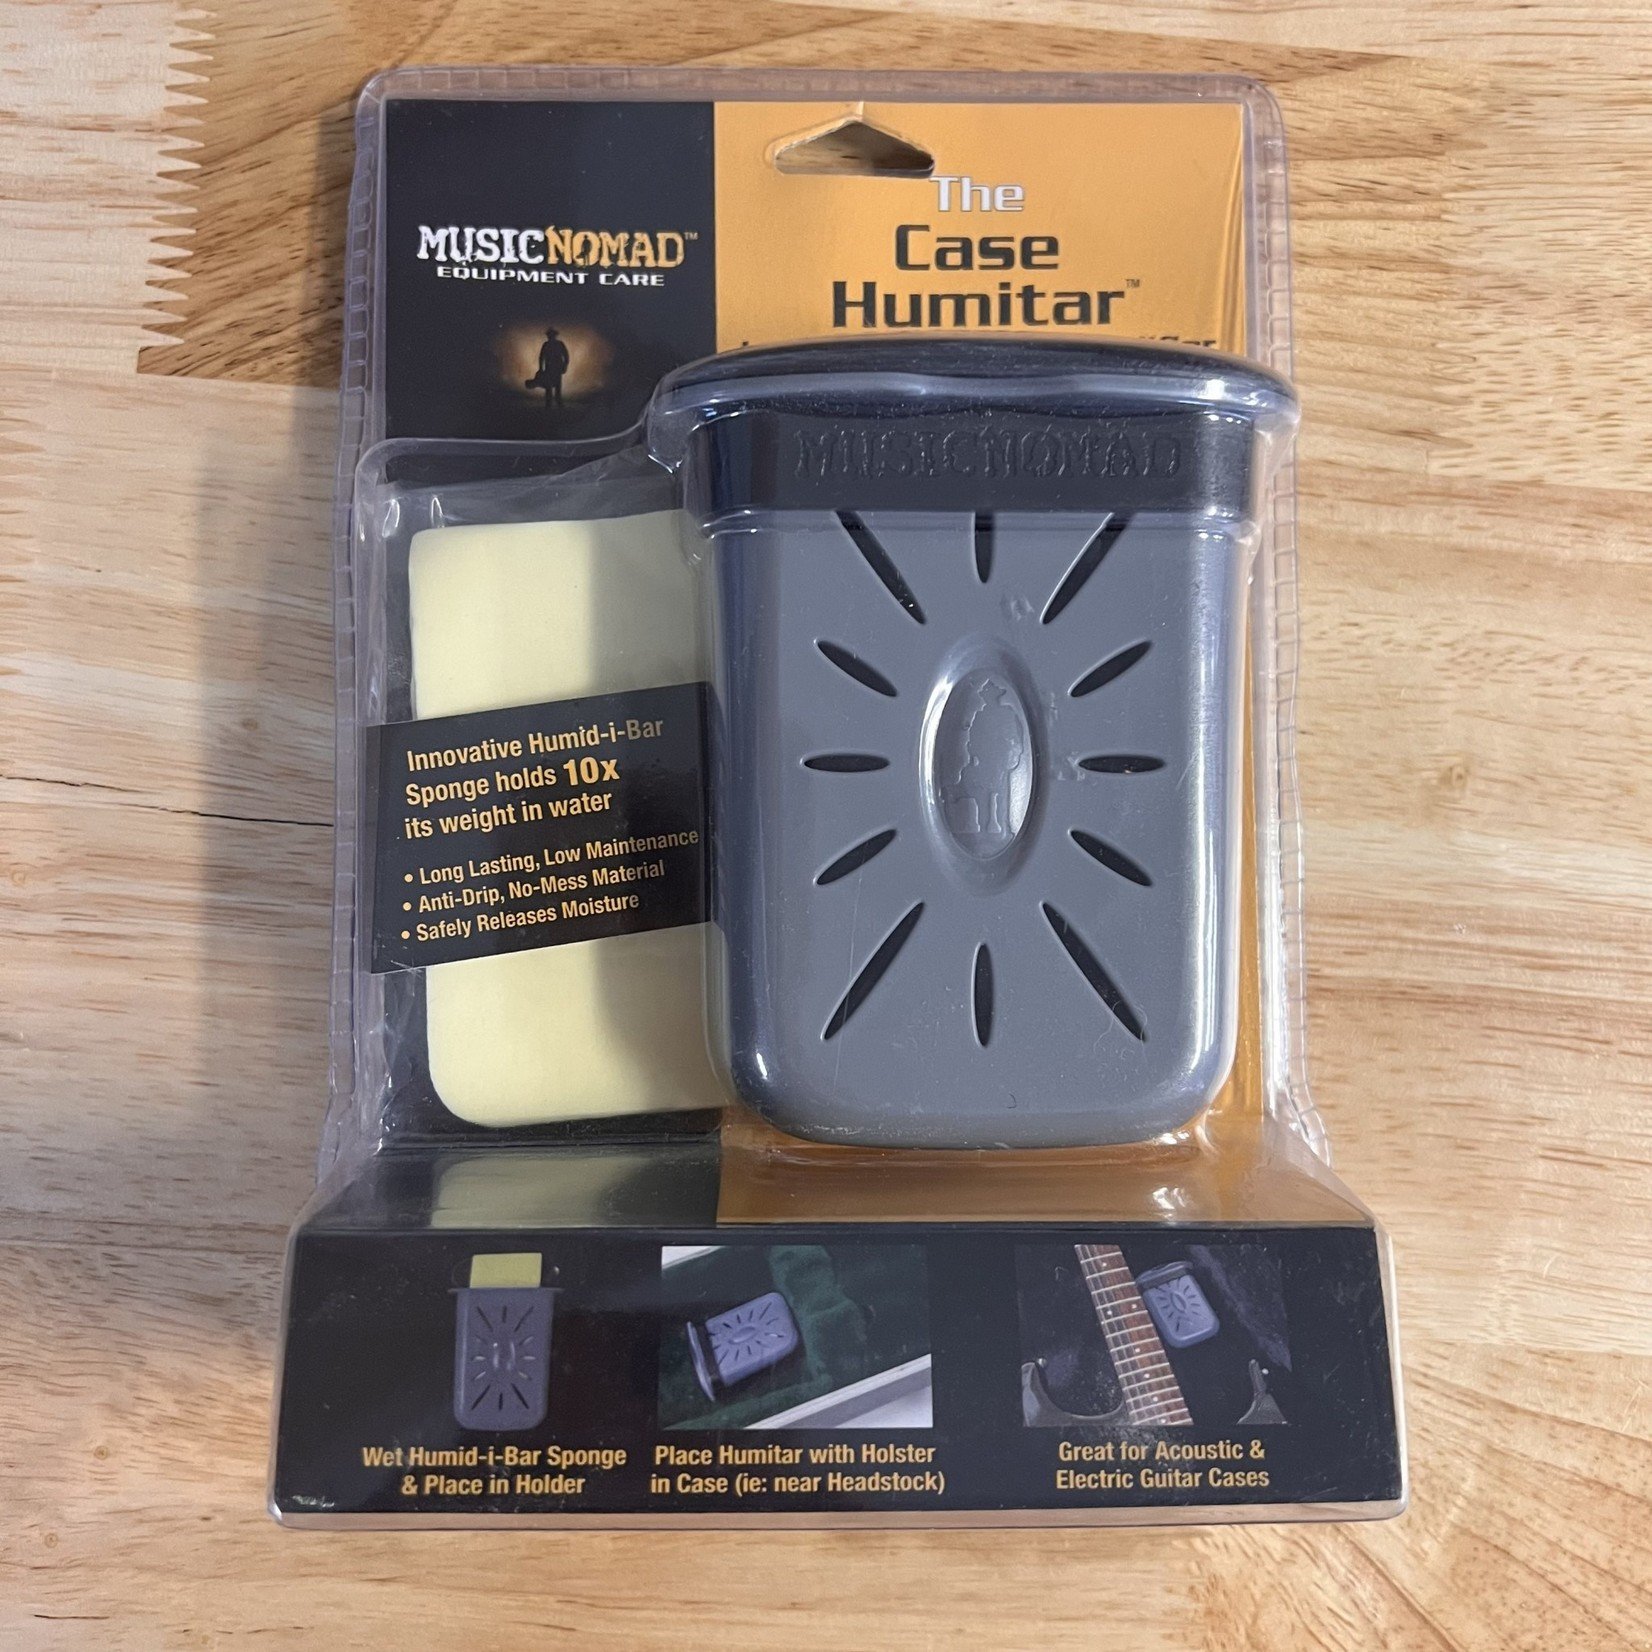 Music Nomad Music Nomad The Humitar - Instrument Case Humidifier w/ Case Holster 3" x 3.75